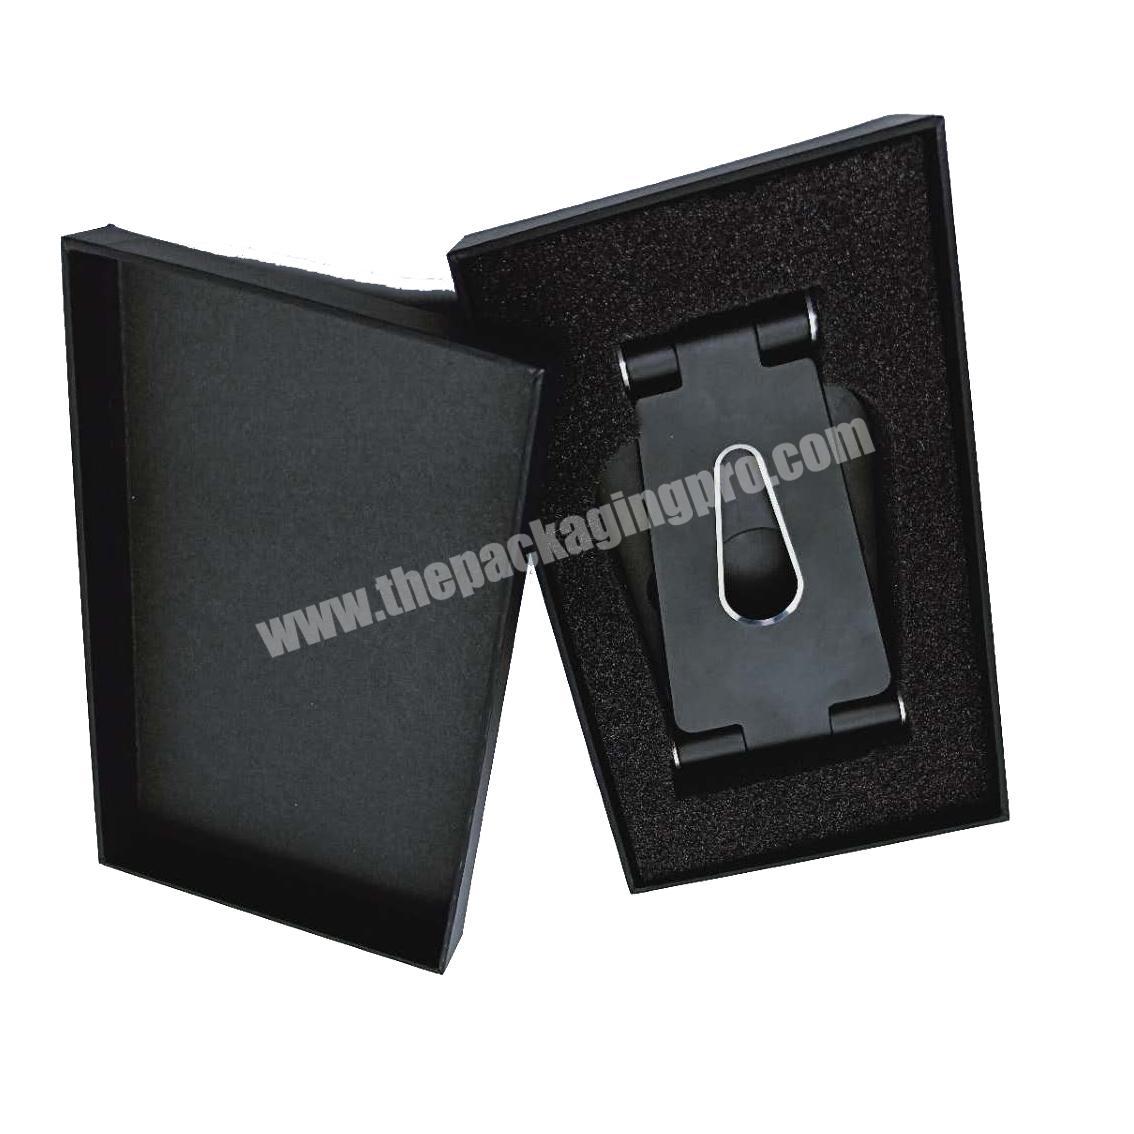 Black lid and base box gift card boxes wholesale in China